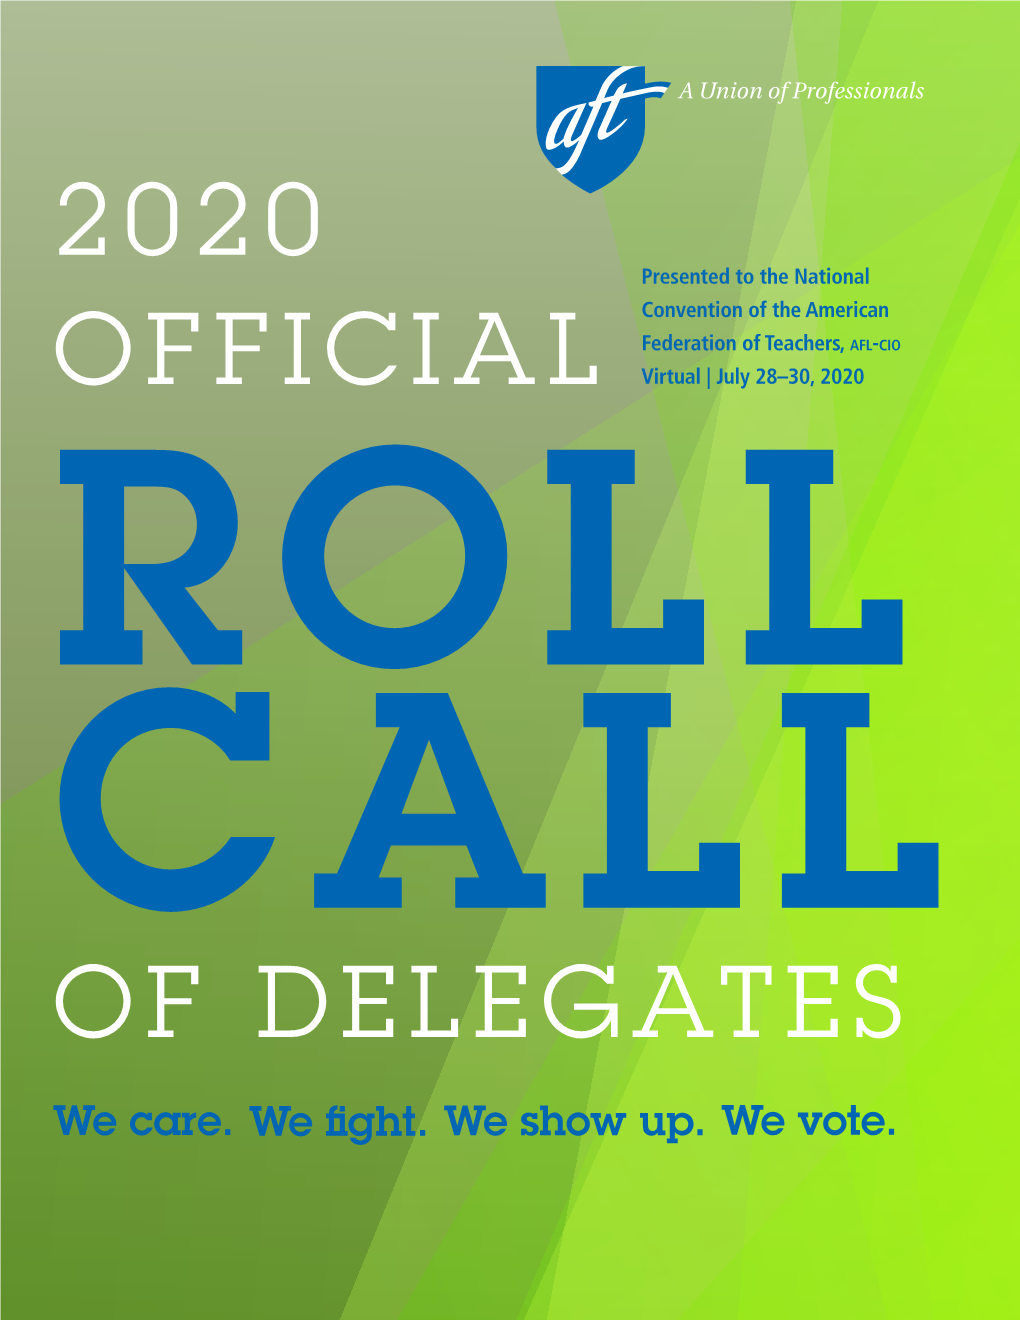 2020 Official Roll Call of Delegates